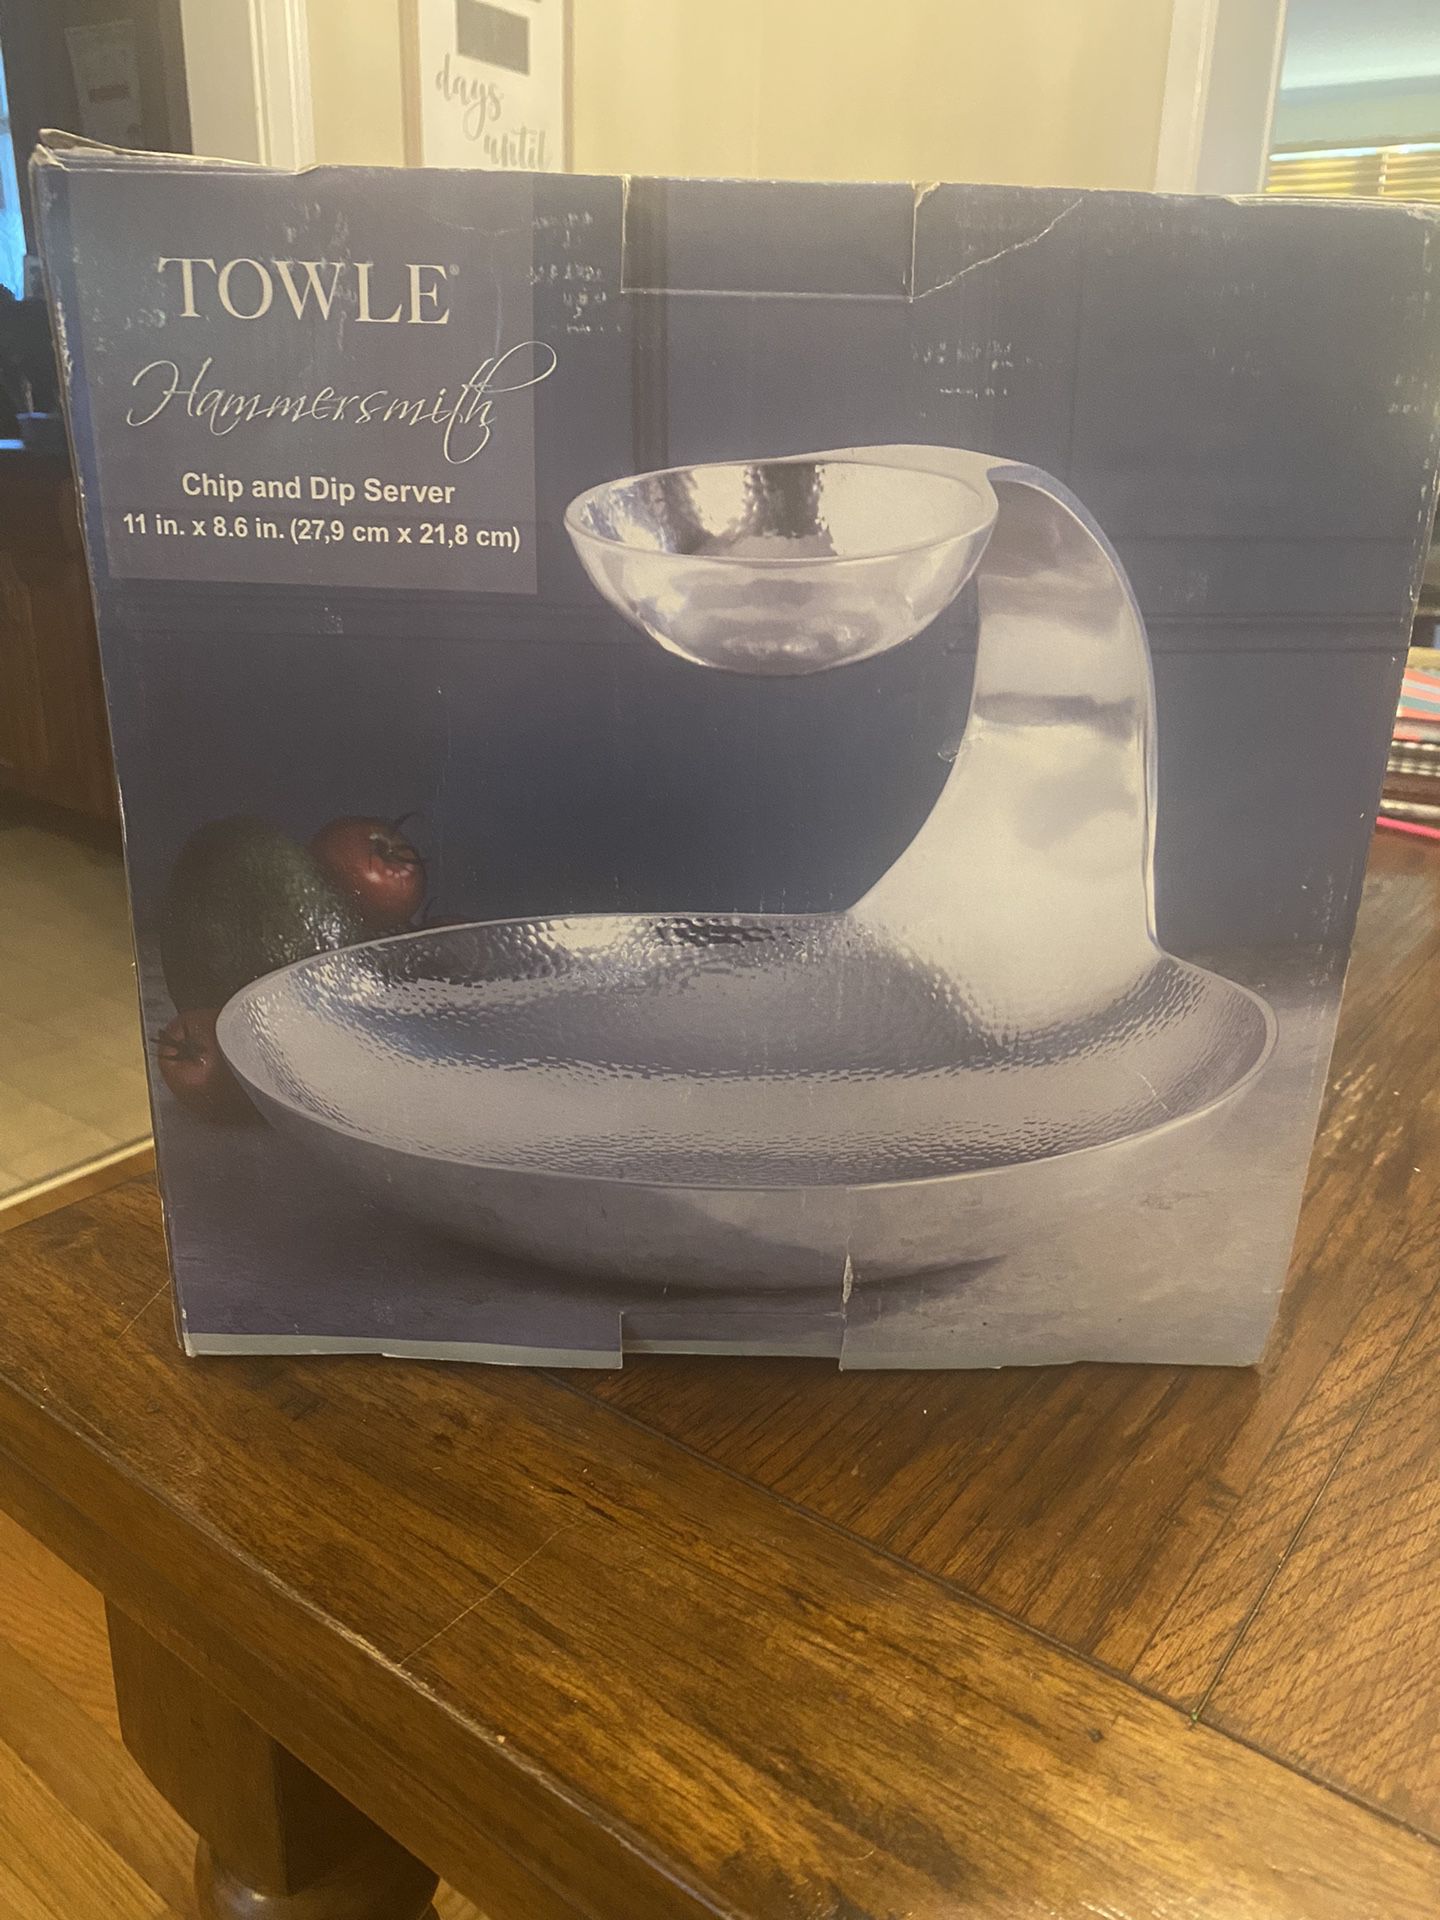 Towle Hammersmith Chip and Dip Server - Brand New 